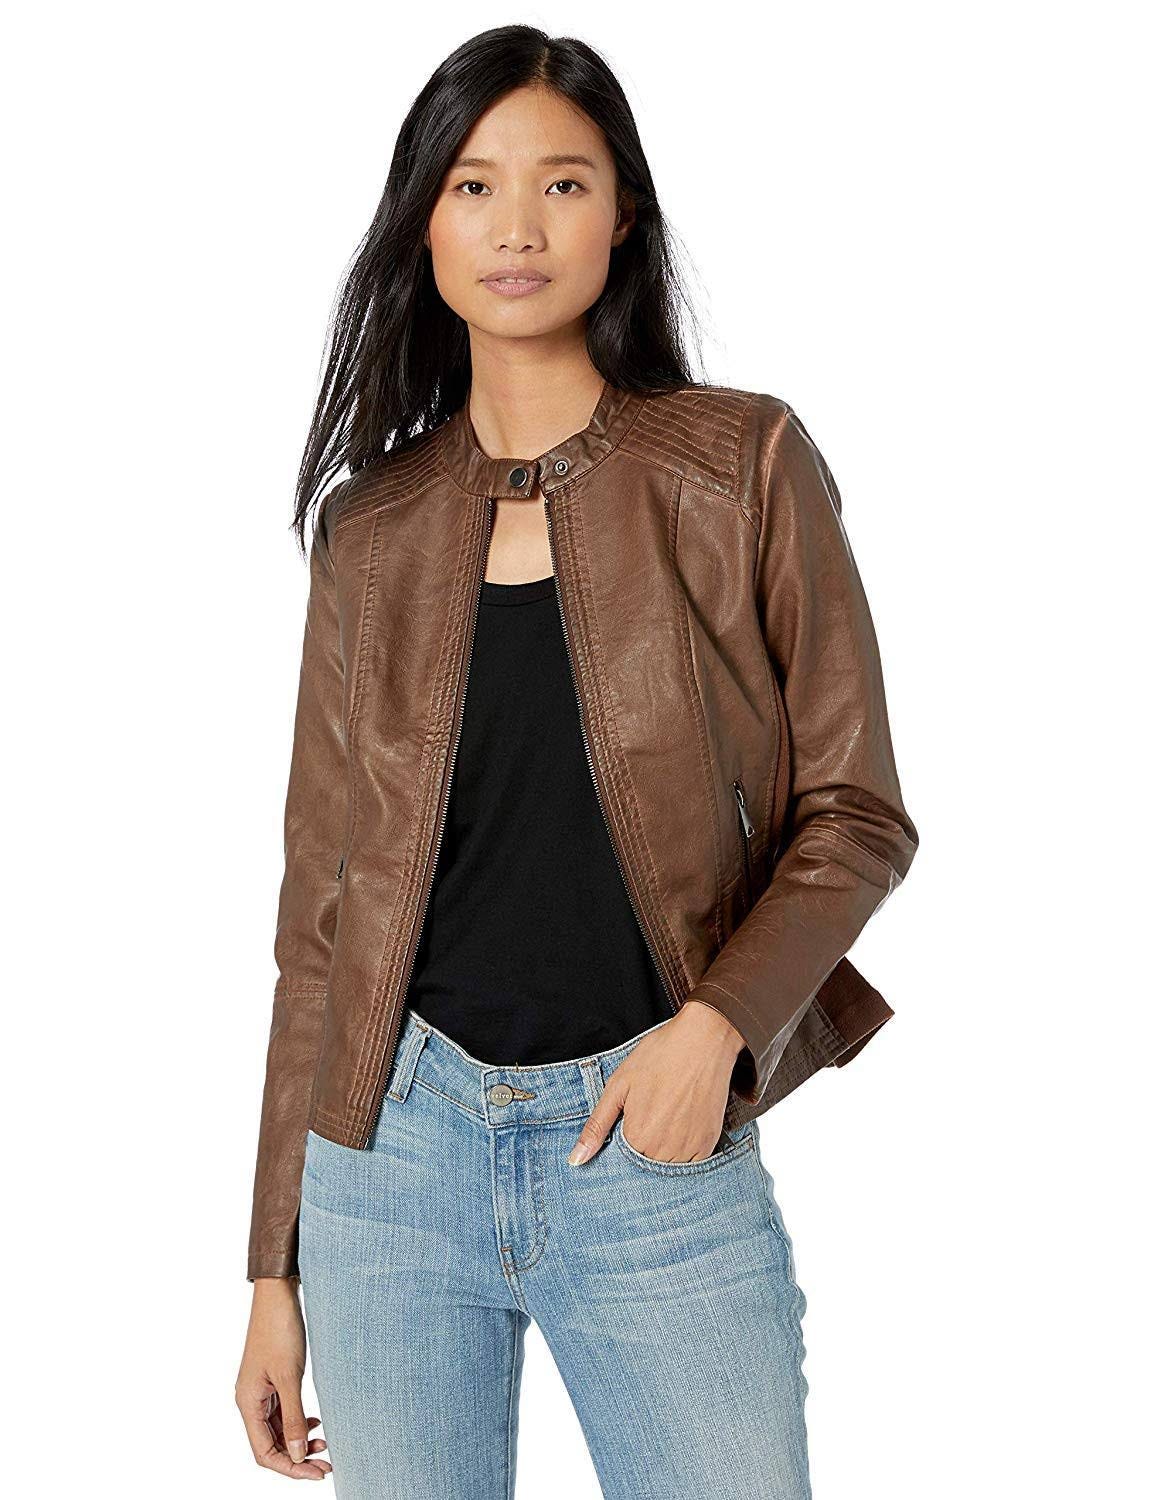 Comfortable Faux Leather Women's Moto Jacket with Stretch Panels | Image